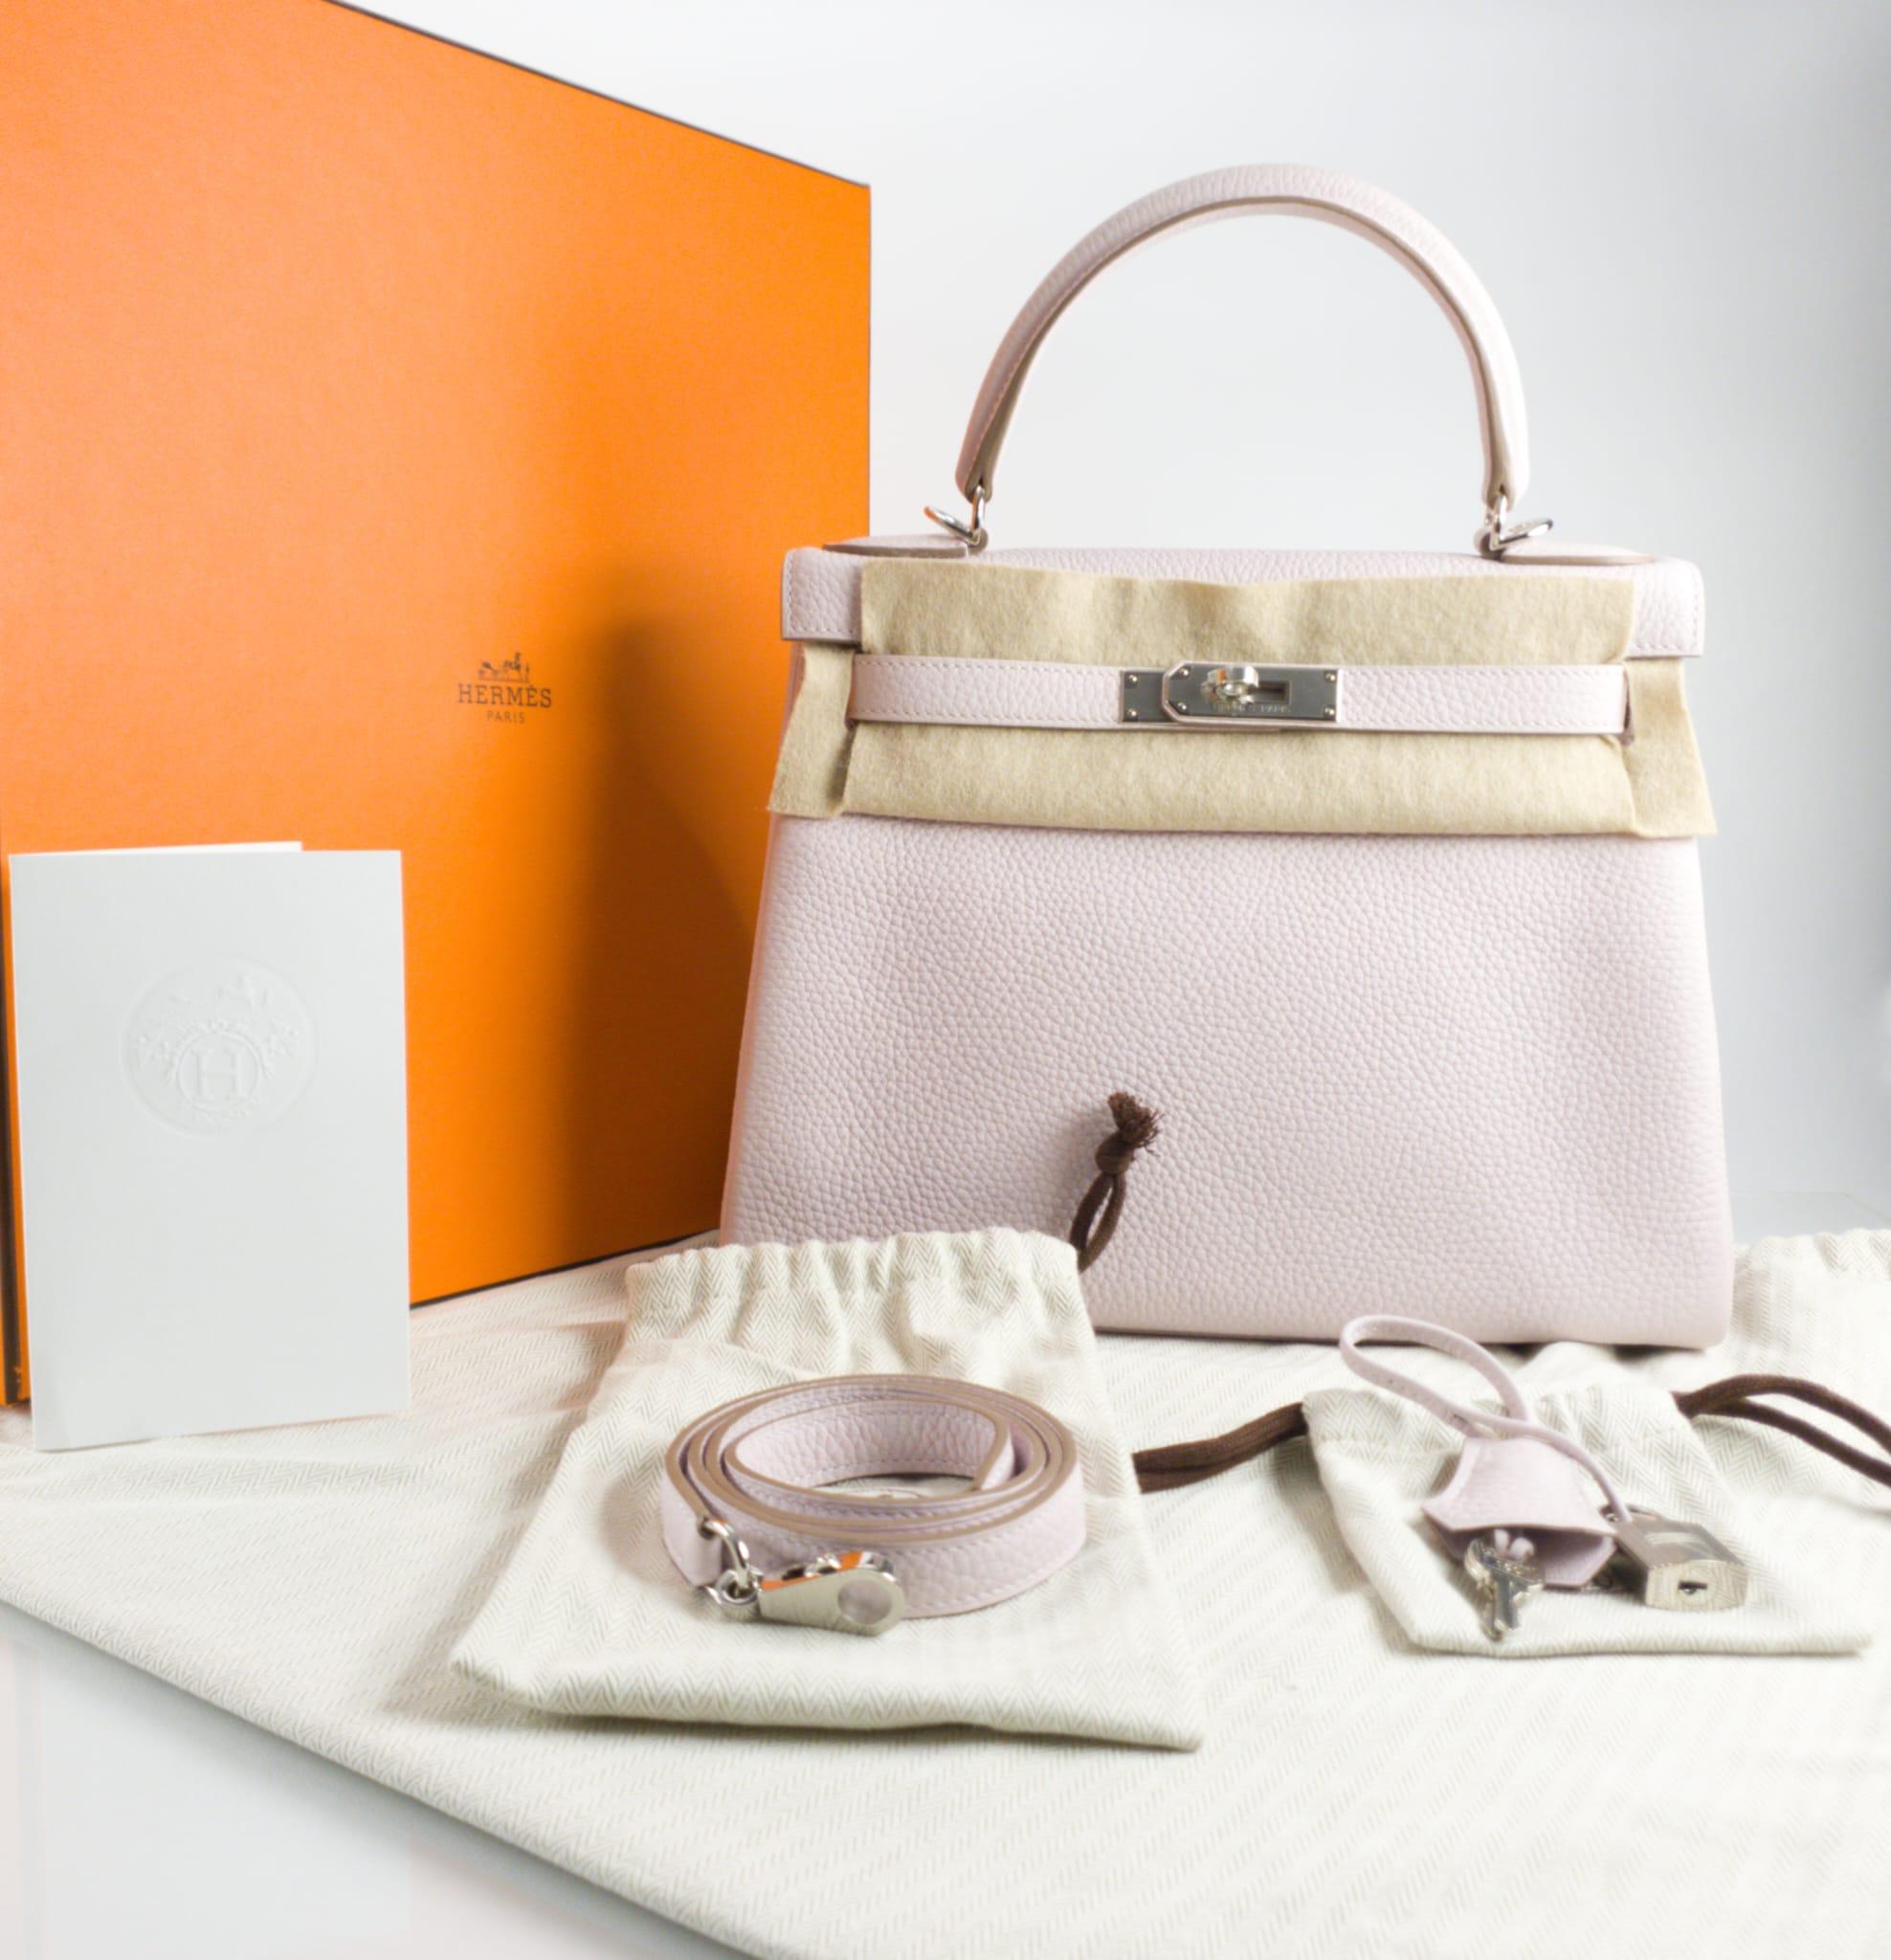 Hermès Kelly 28 Retourne Mauve Pale Taurillon Clemence leather and Palladium hardware 2023 -Brand New in Box
Includes lock, two keys, clochette, clochette dust bag, care booklet, raincoat, dust bag, and box